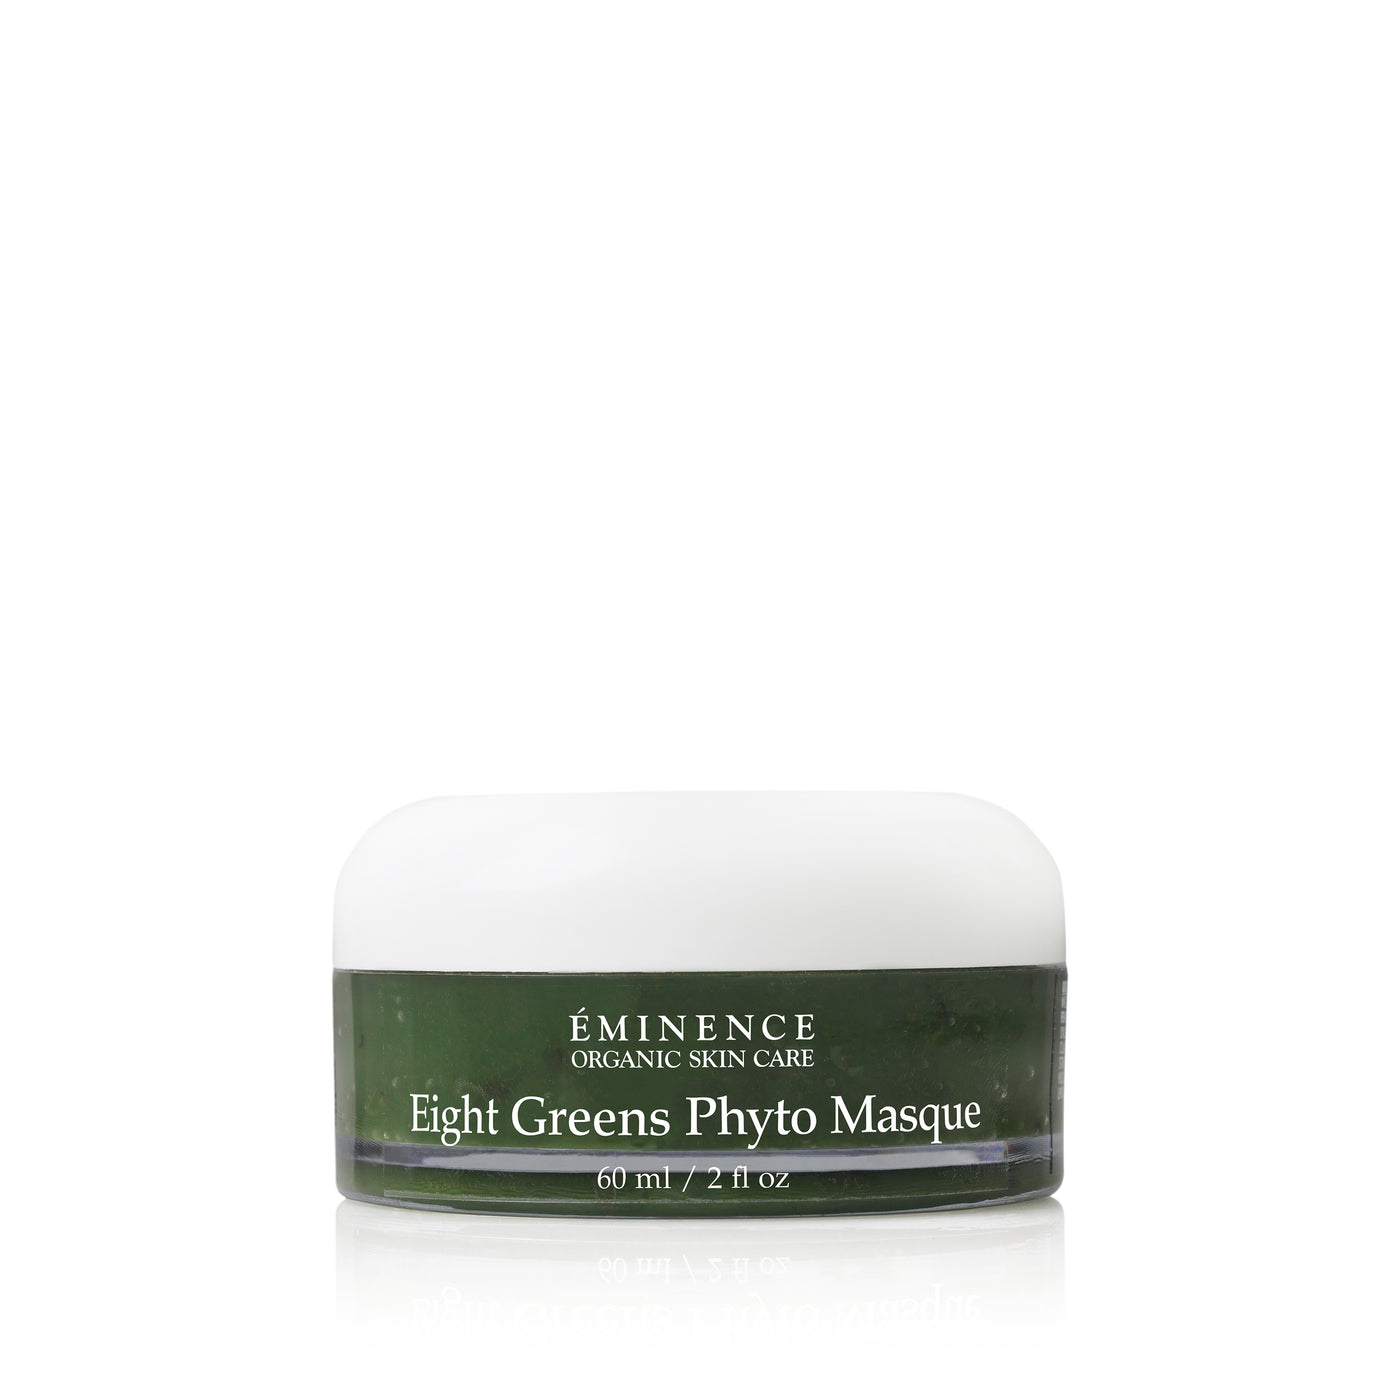 Eminence Organics  Eight Greens Phyto Masque (Not Hot) - Radiance Clean Beauty